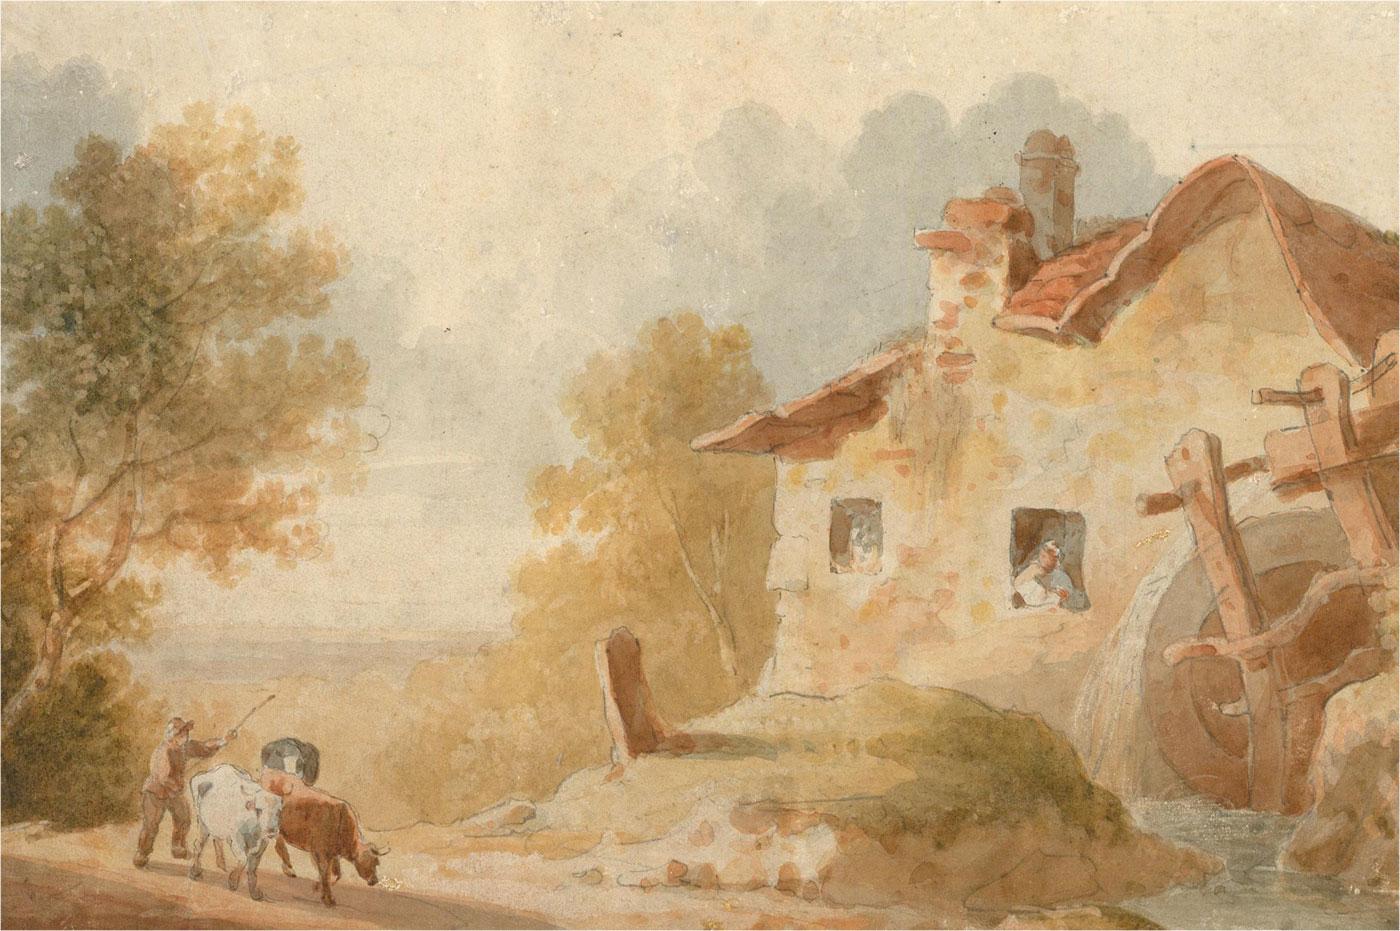 A fine bucolic watercolour showing a farmer, driving home two bulls towards and old watermill. The artist has captured beautifully idyllic light that illuminates the rustic mill building and adds a feel of early Autumn afternoon to the piece. On